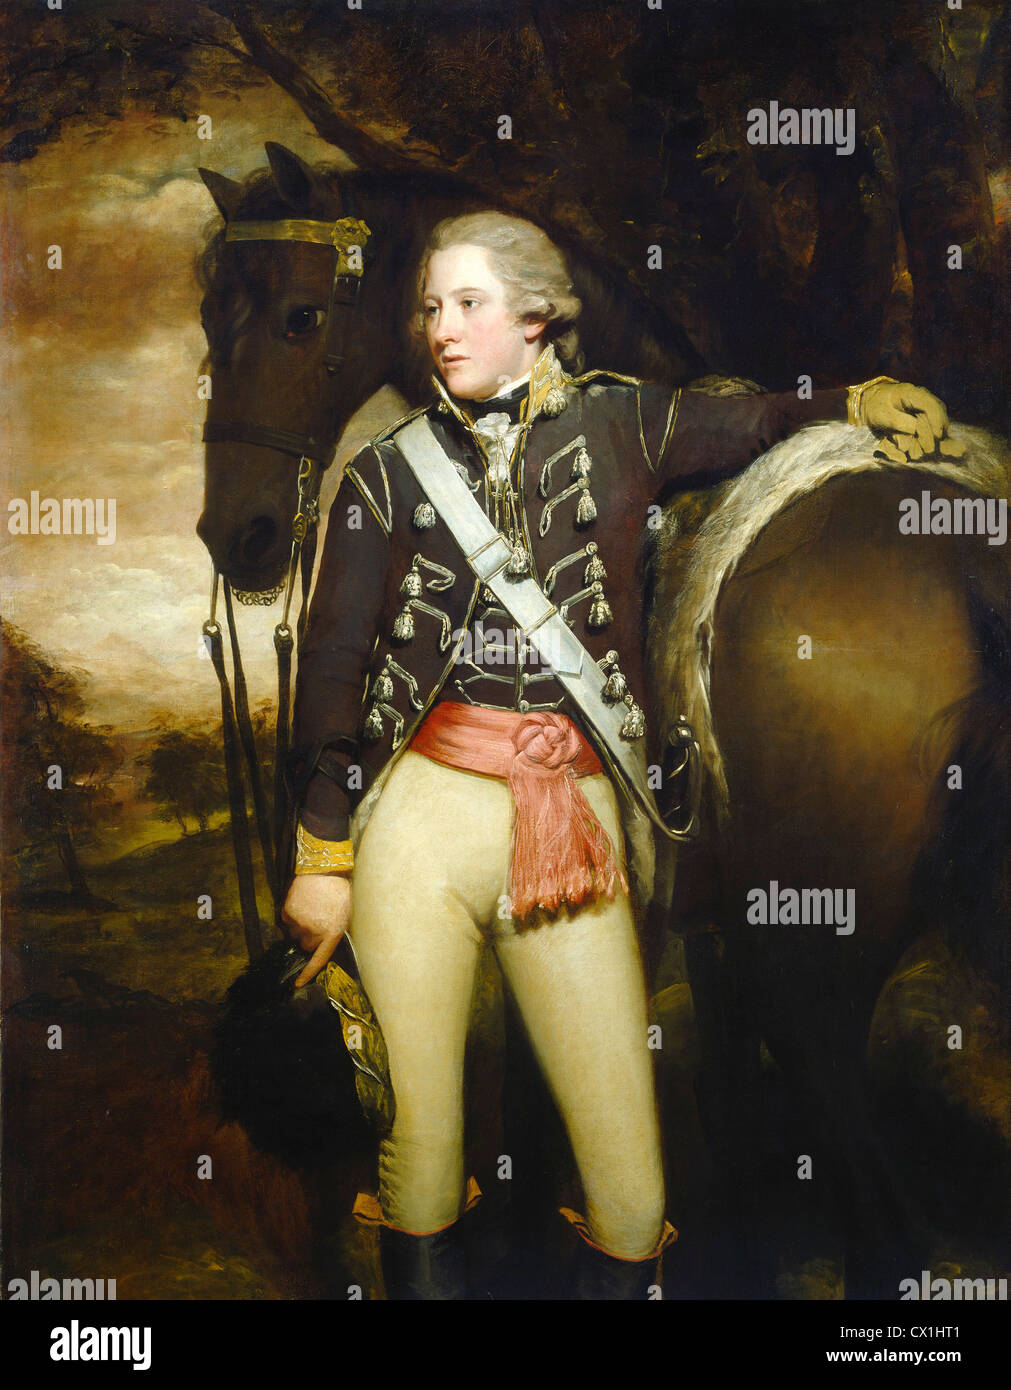 Sir Henry Raeburn, Captain Patrick Miller, Scottish, 1756 - 1823, 1788/1789, altered later (date unknown), oil on canvas Stock Photo